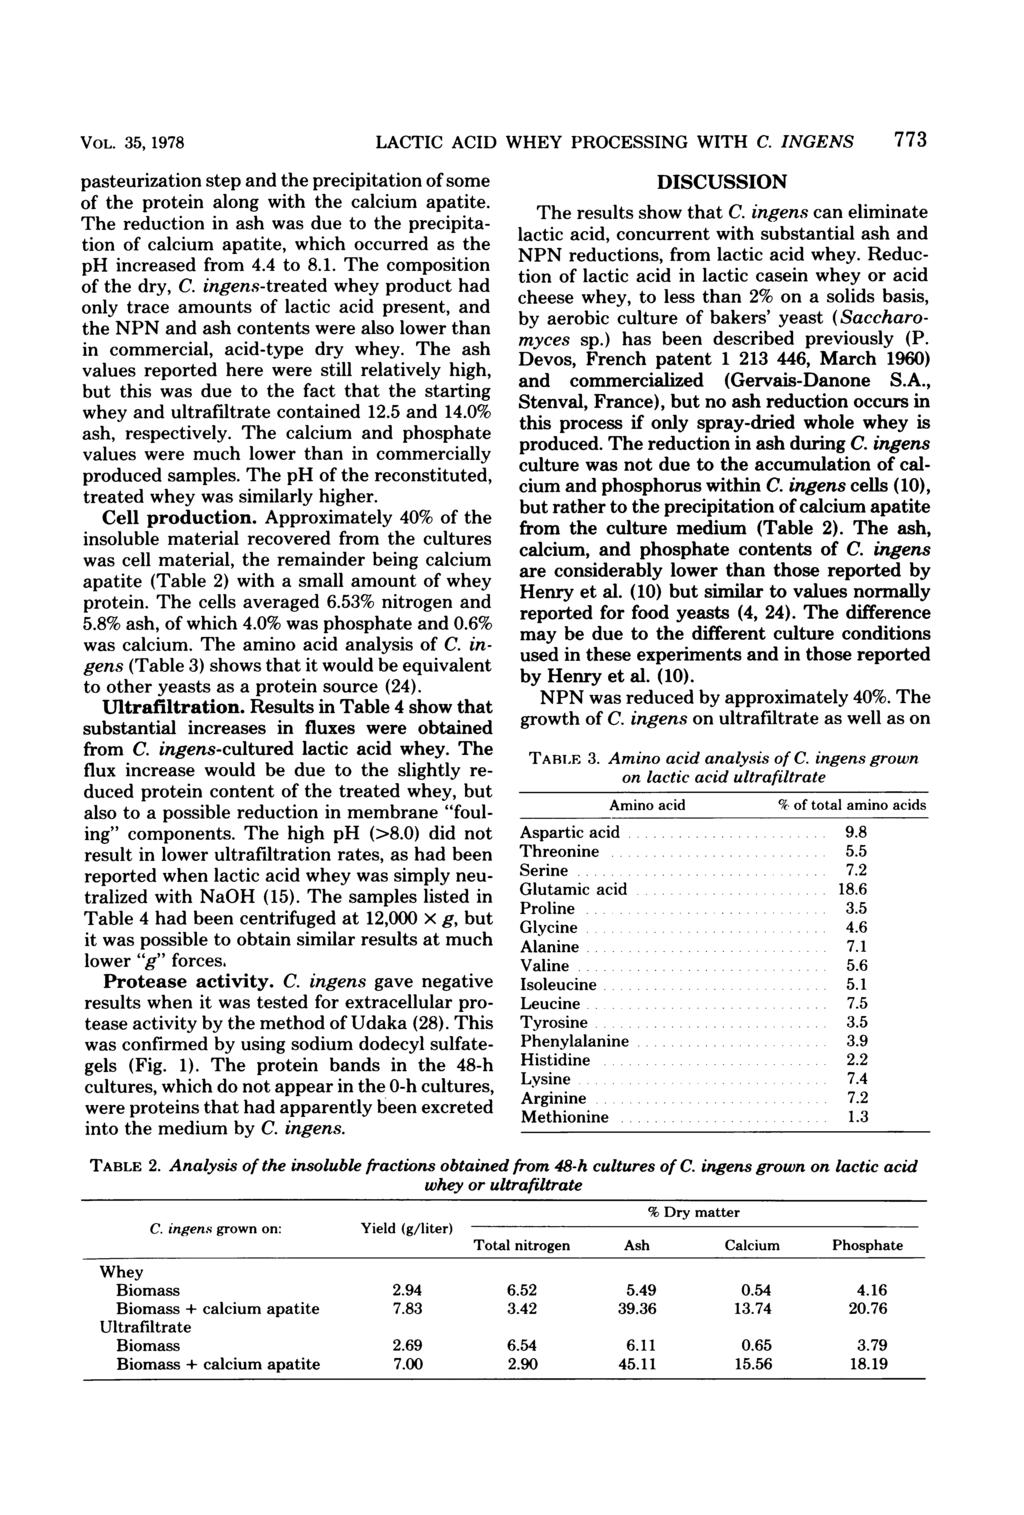 VOL. 35, 1978 pasteurization step and the precipitation of some of the protein along with the calcium apatite.